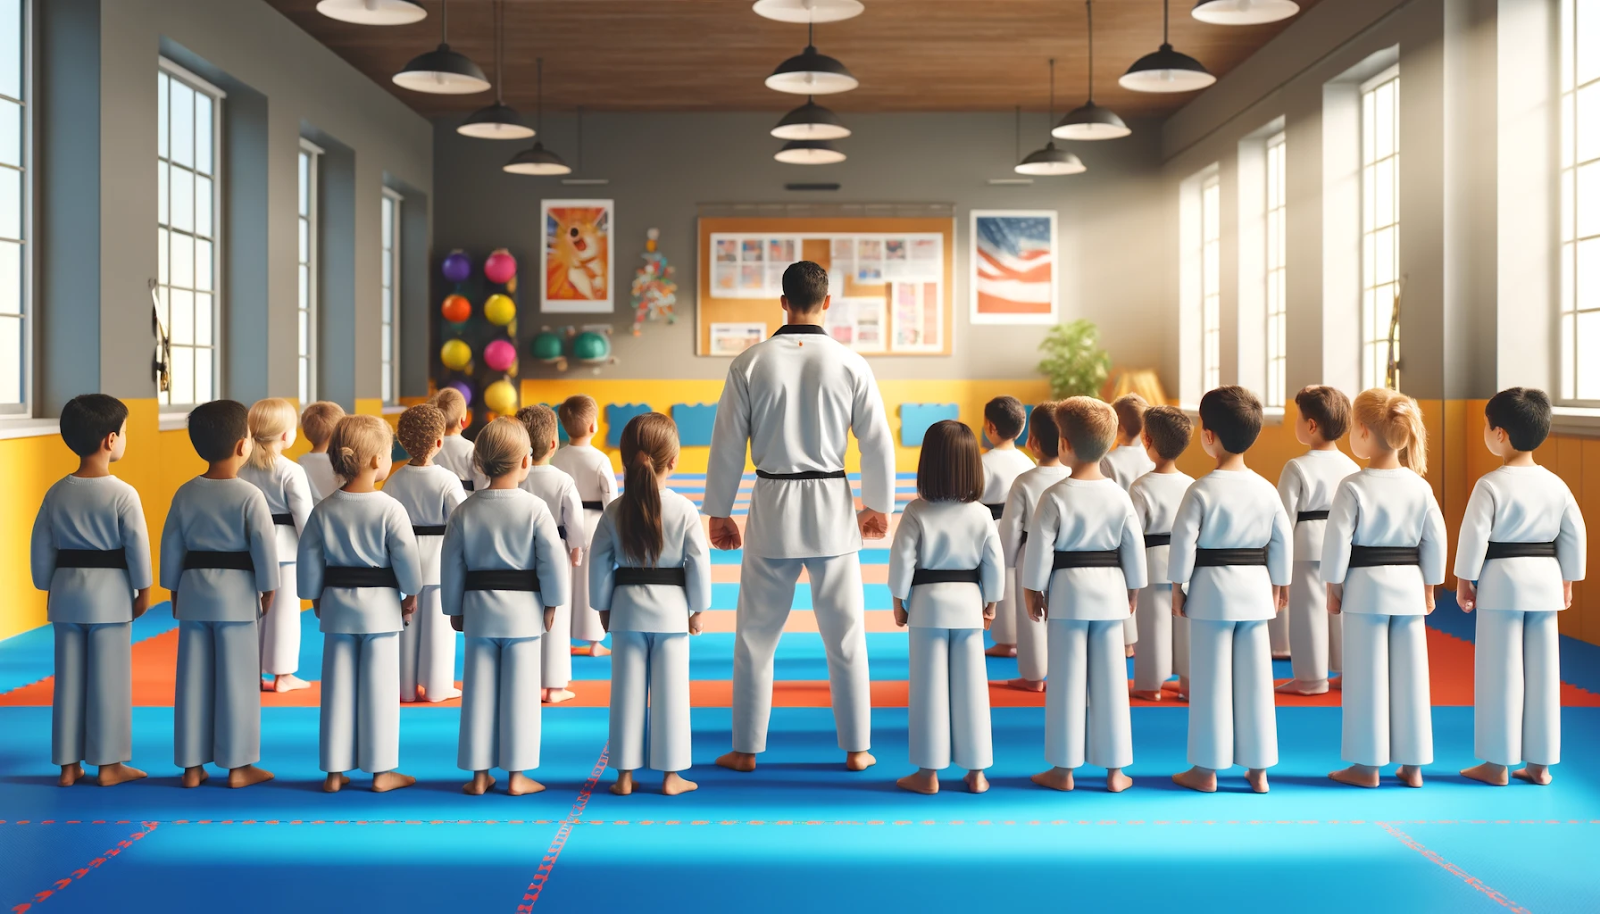 Students standing at attention in a taekwondo class.